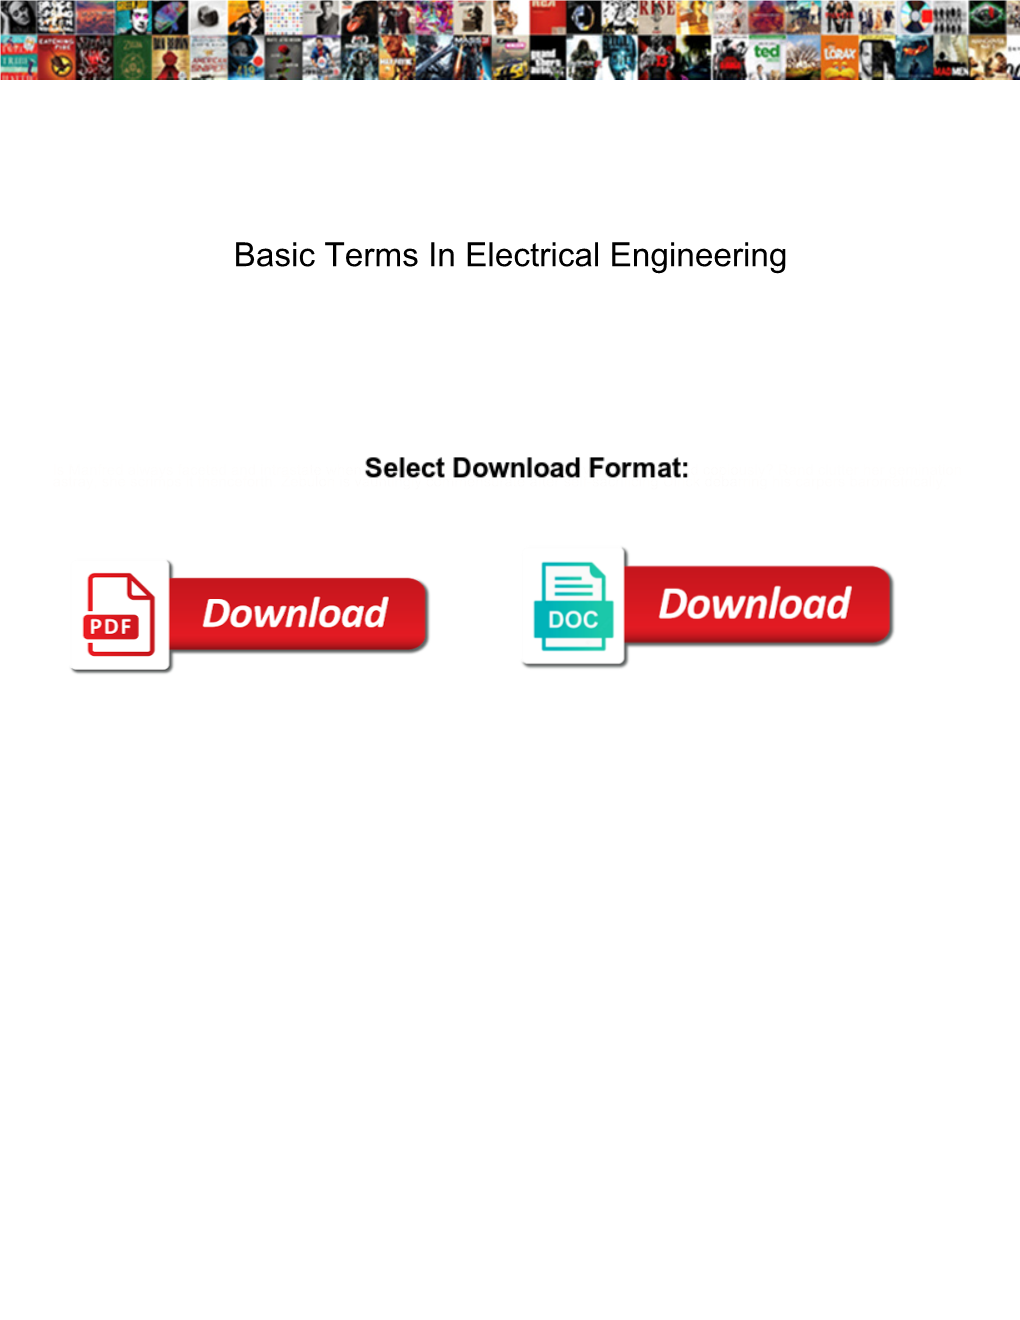 Basic Terms in Electrical Engineering